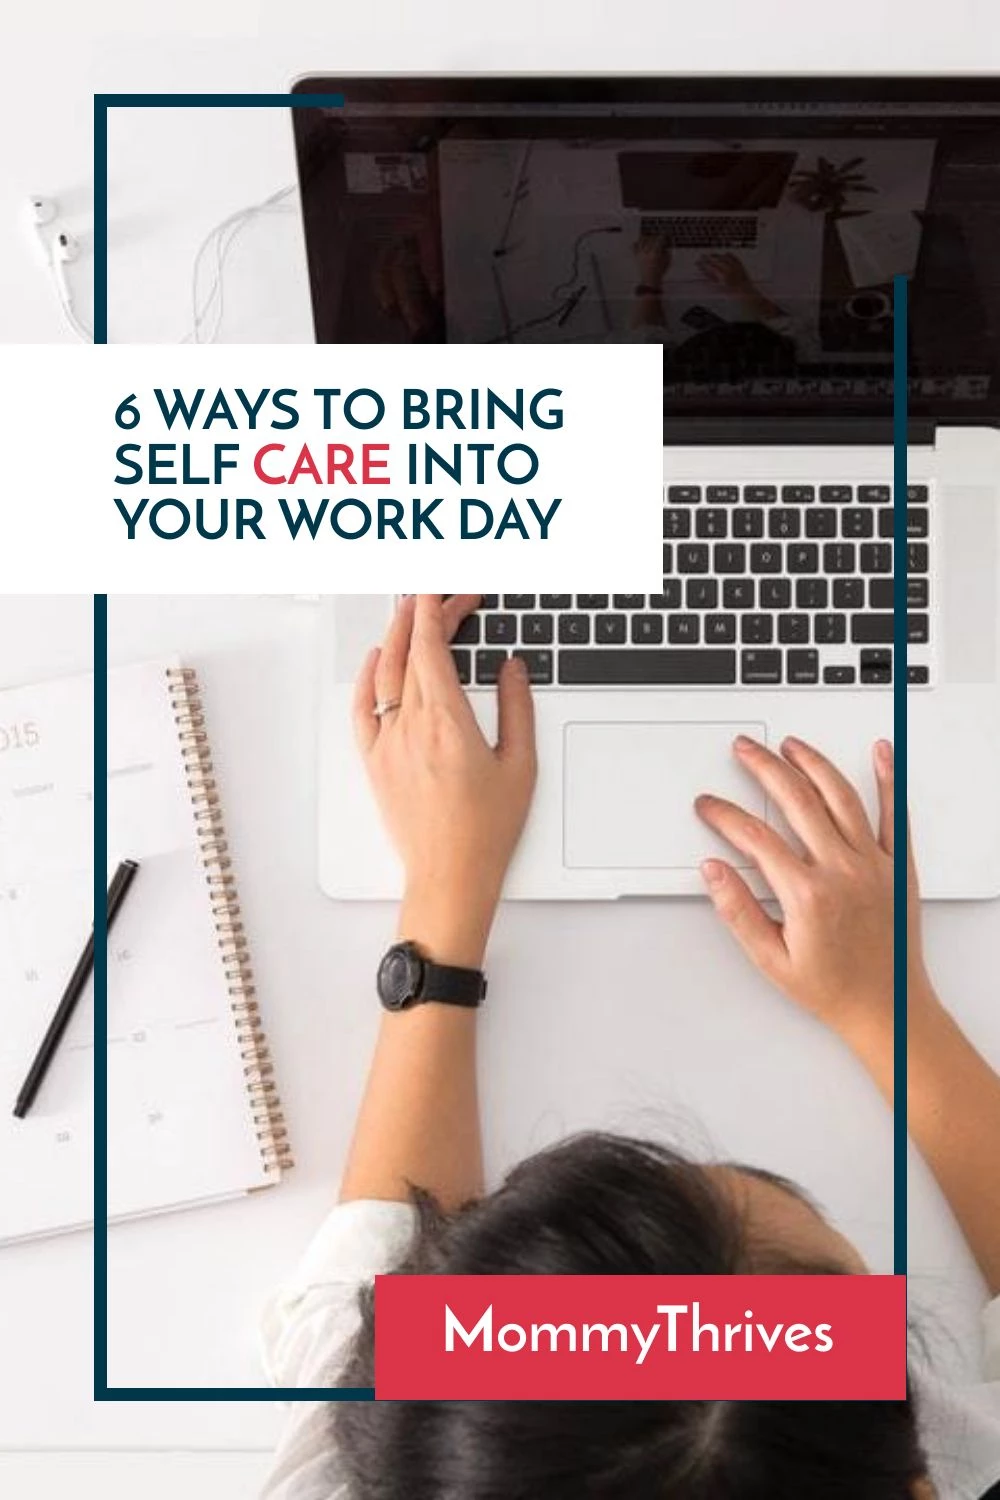 Self Care Activites To Do At Work - Self Care Tips To Relive Work Stress - Self Care Ideas For The Workplace - Ways To Relieve Stress In Your Work Day